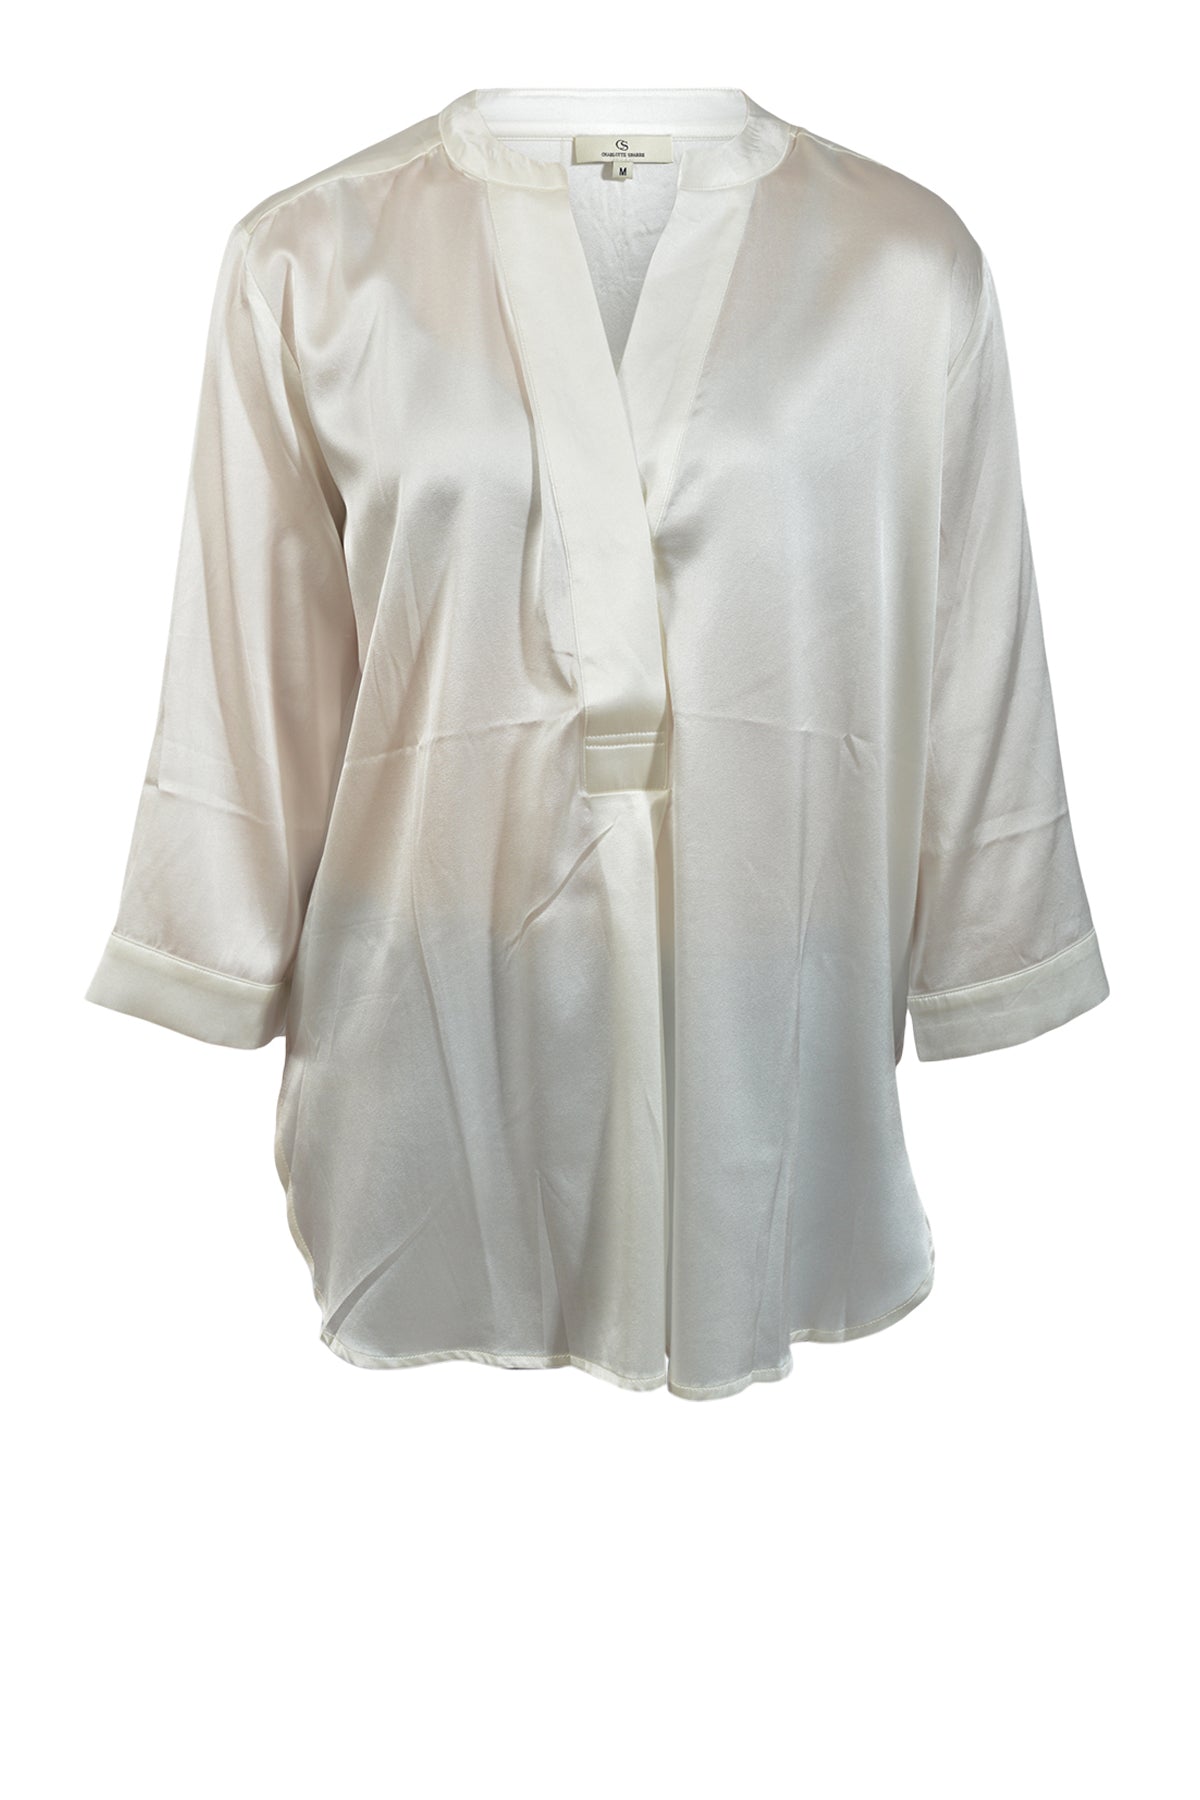 Charlotte Sparre  Bliss blouse 2708, Solid satin White